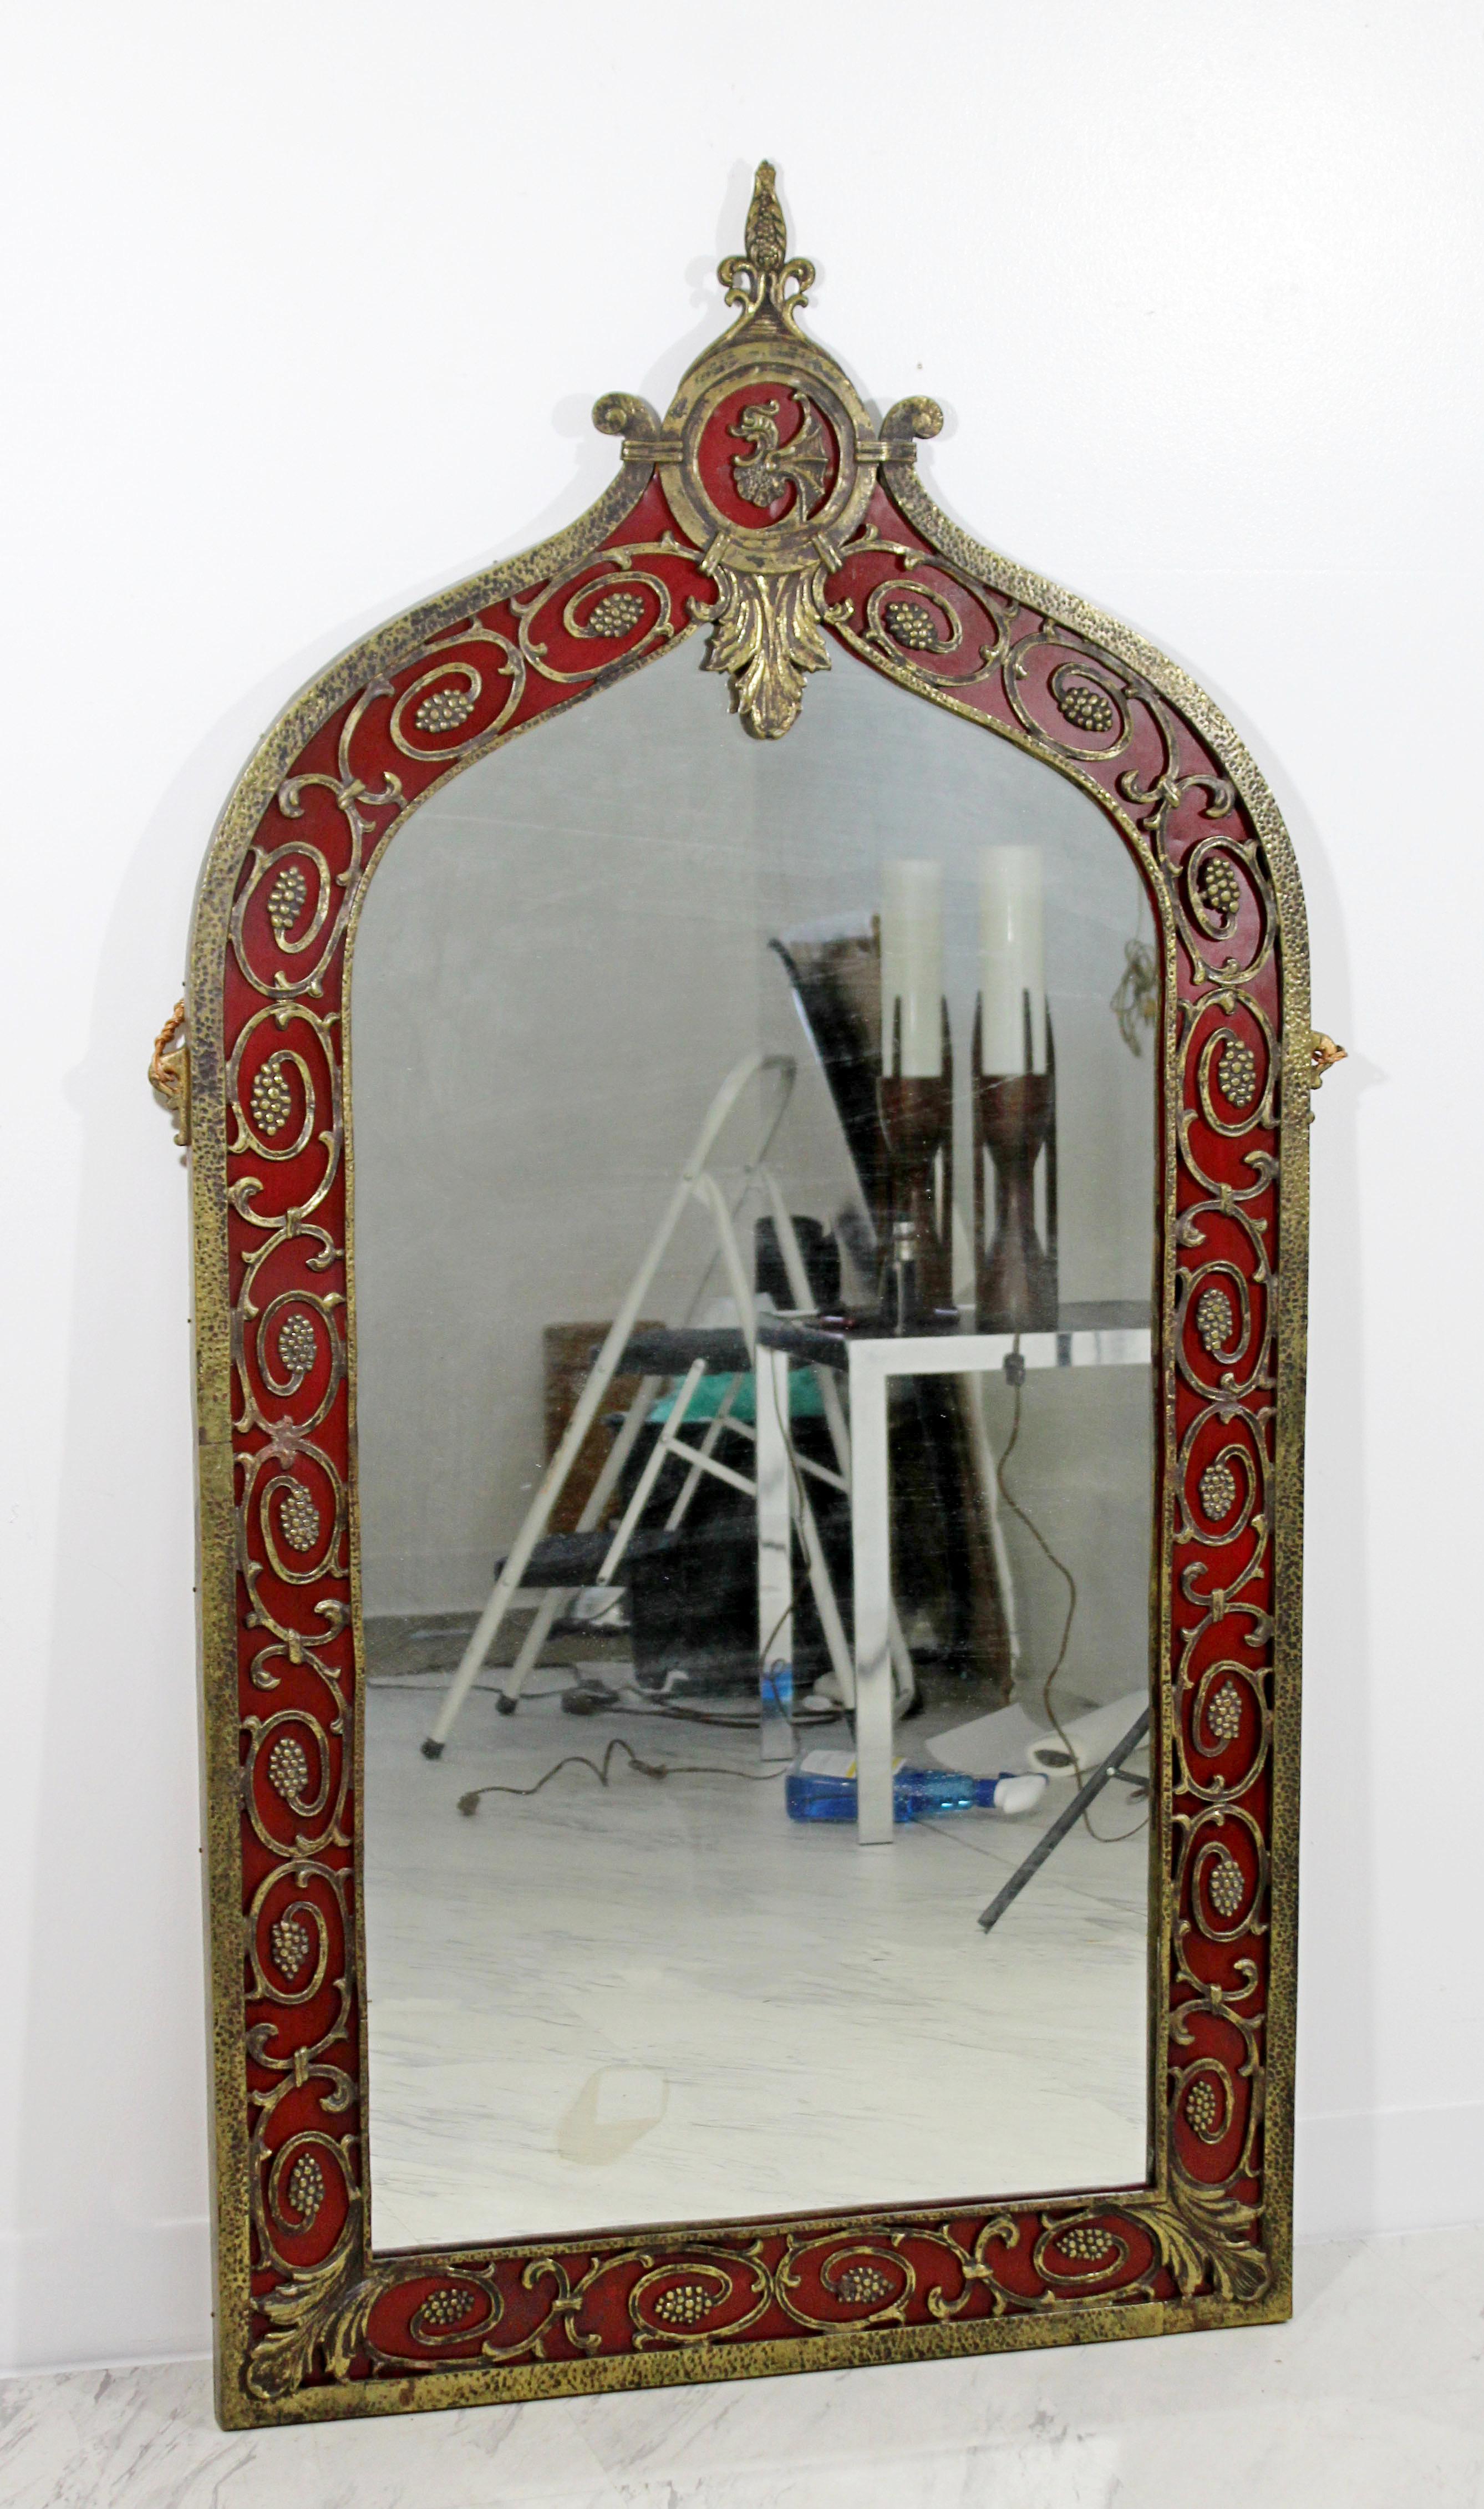 For your consideration is a beautiful, large, ornate bronze wall mirror by Oscar Bach, circa 1920s. In good condition, with some imperfections in the glass. The dimensions are 28.5